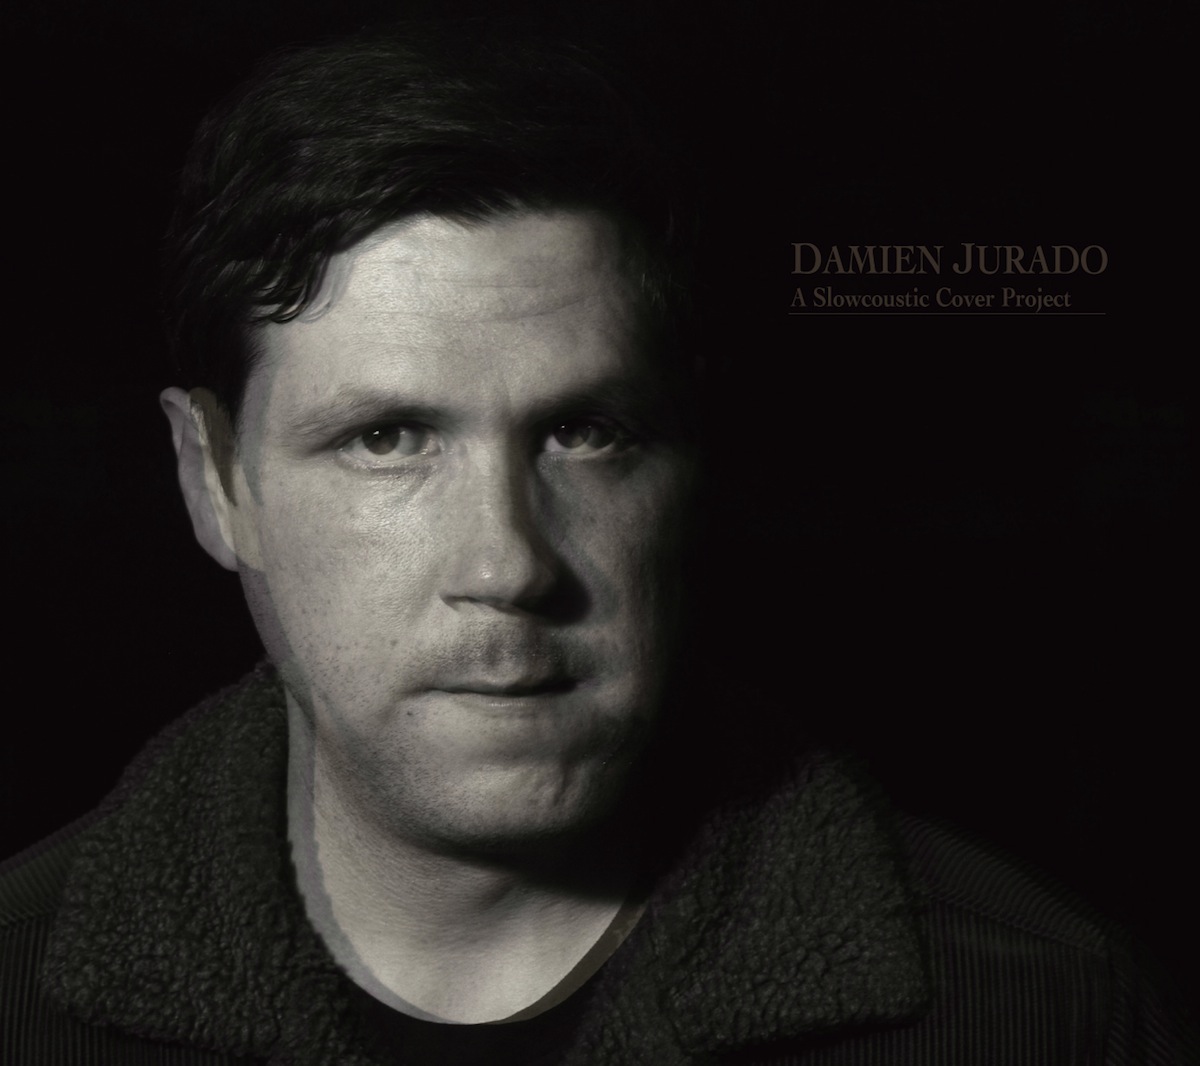 Damien-Jurado--A-Slowcoustic-Cover-Project